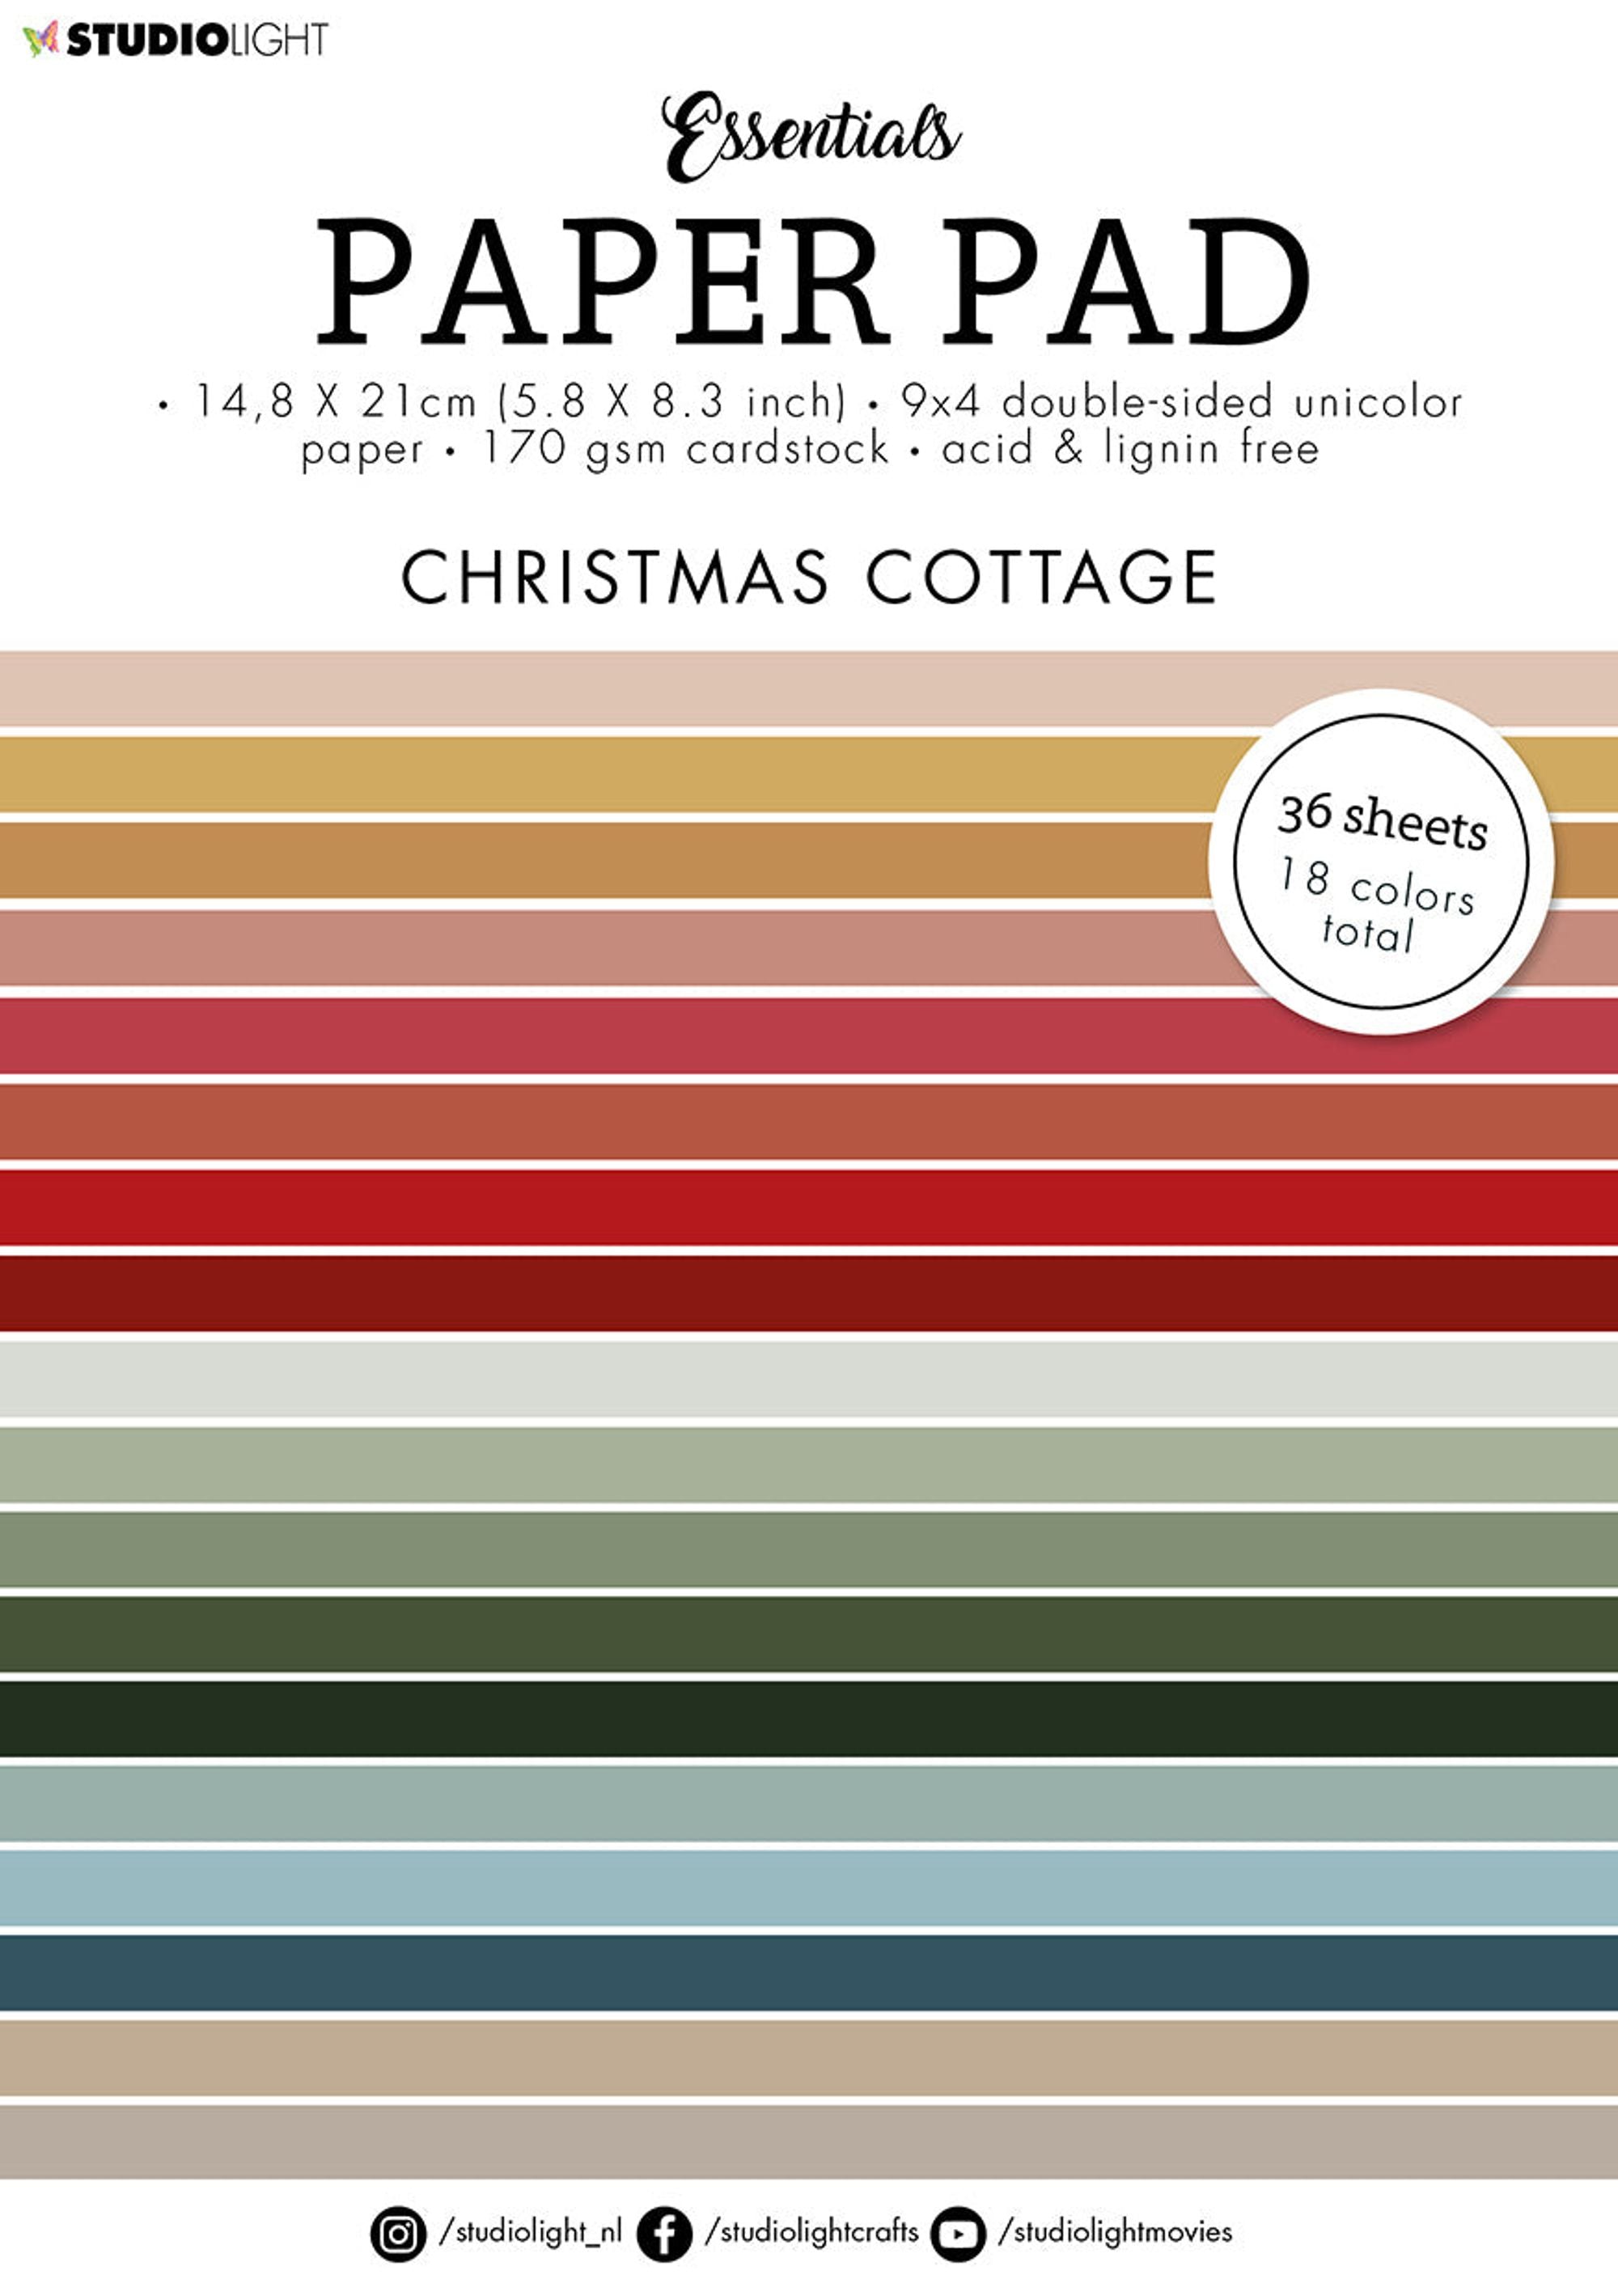 SL Paper Pad Double Sided Unicolor Christmas Cottage Essentials 148x210x9mm 36 SH nr.53